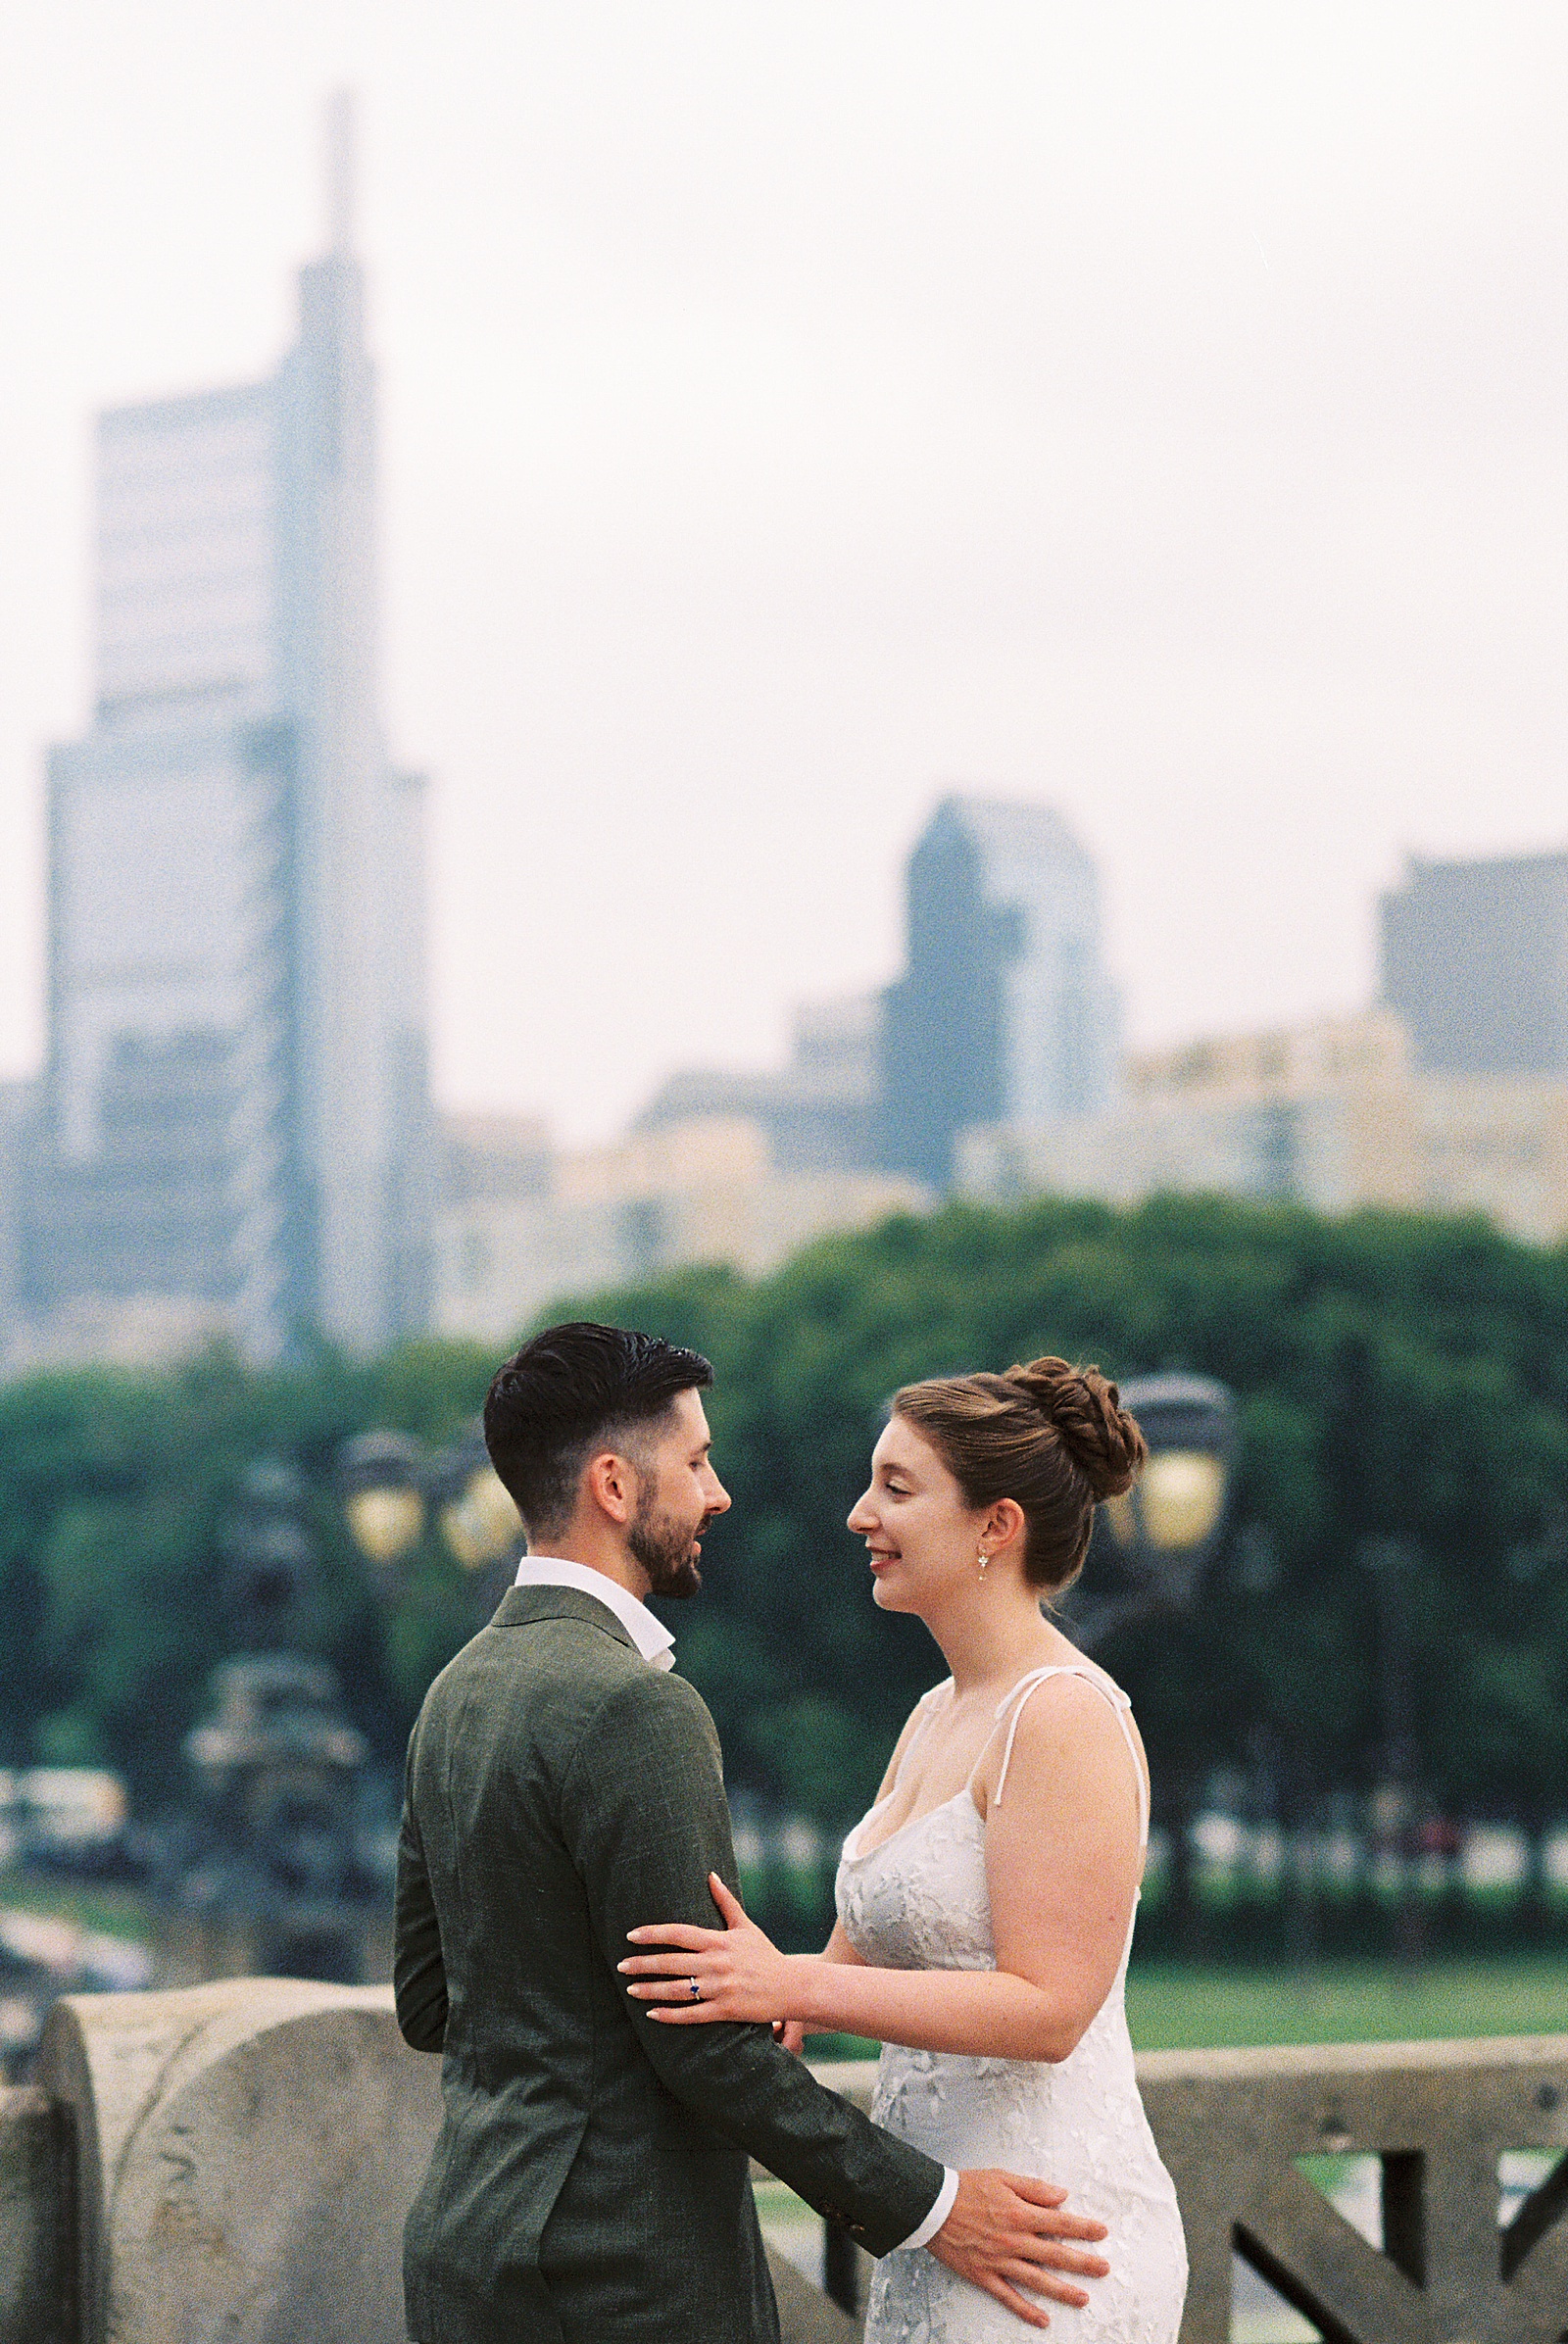 A bride and groom embrace at the first look for their Philadelphia elopement on film photography.